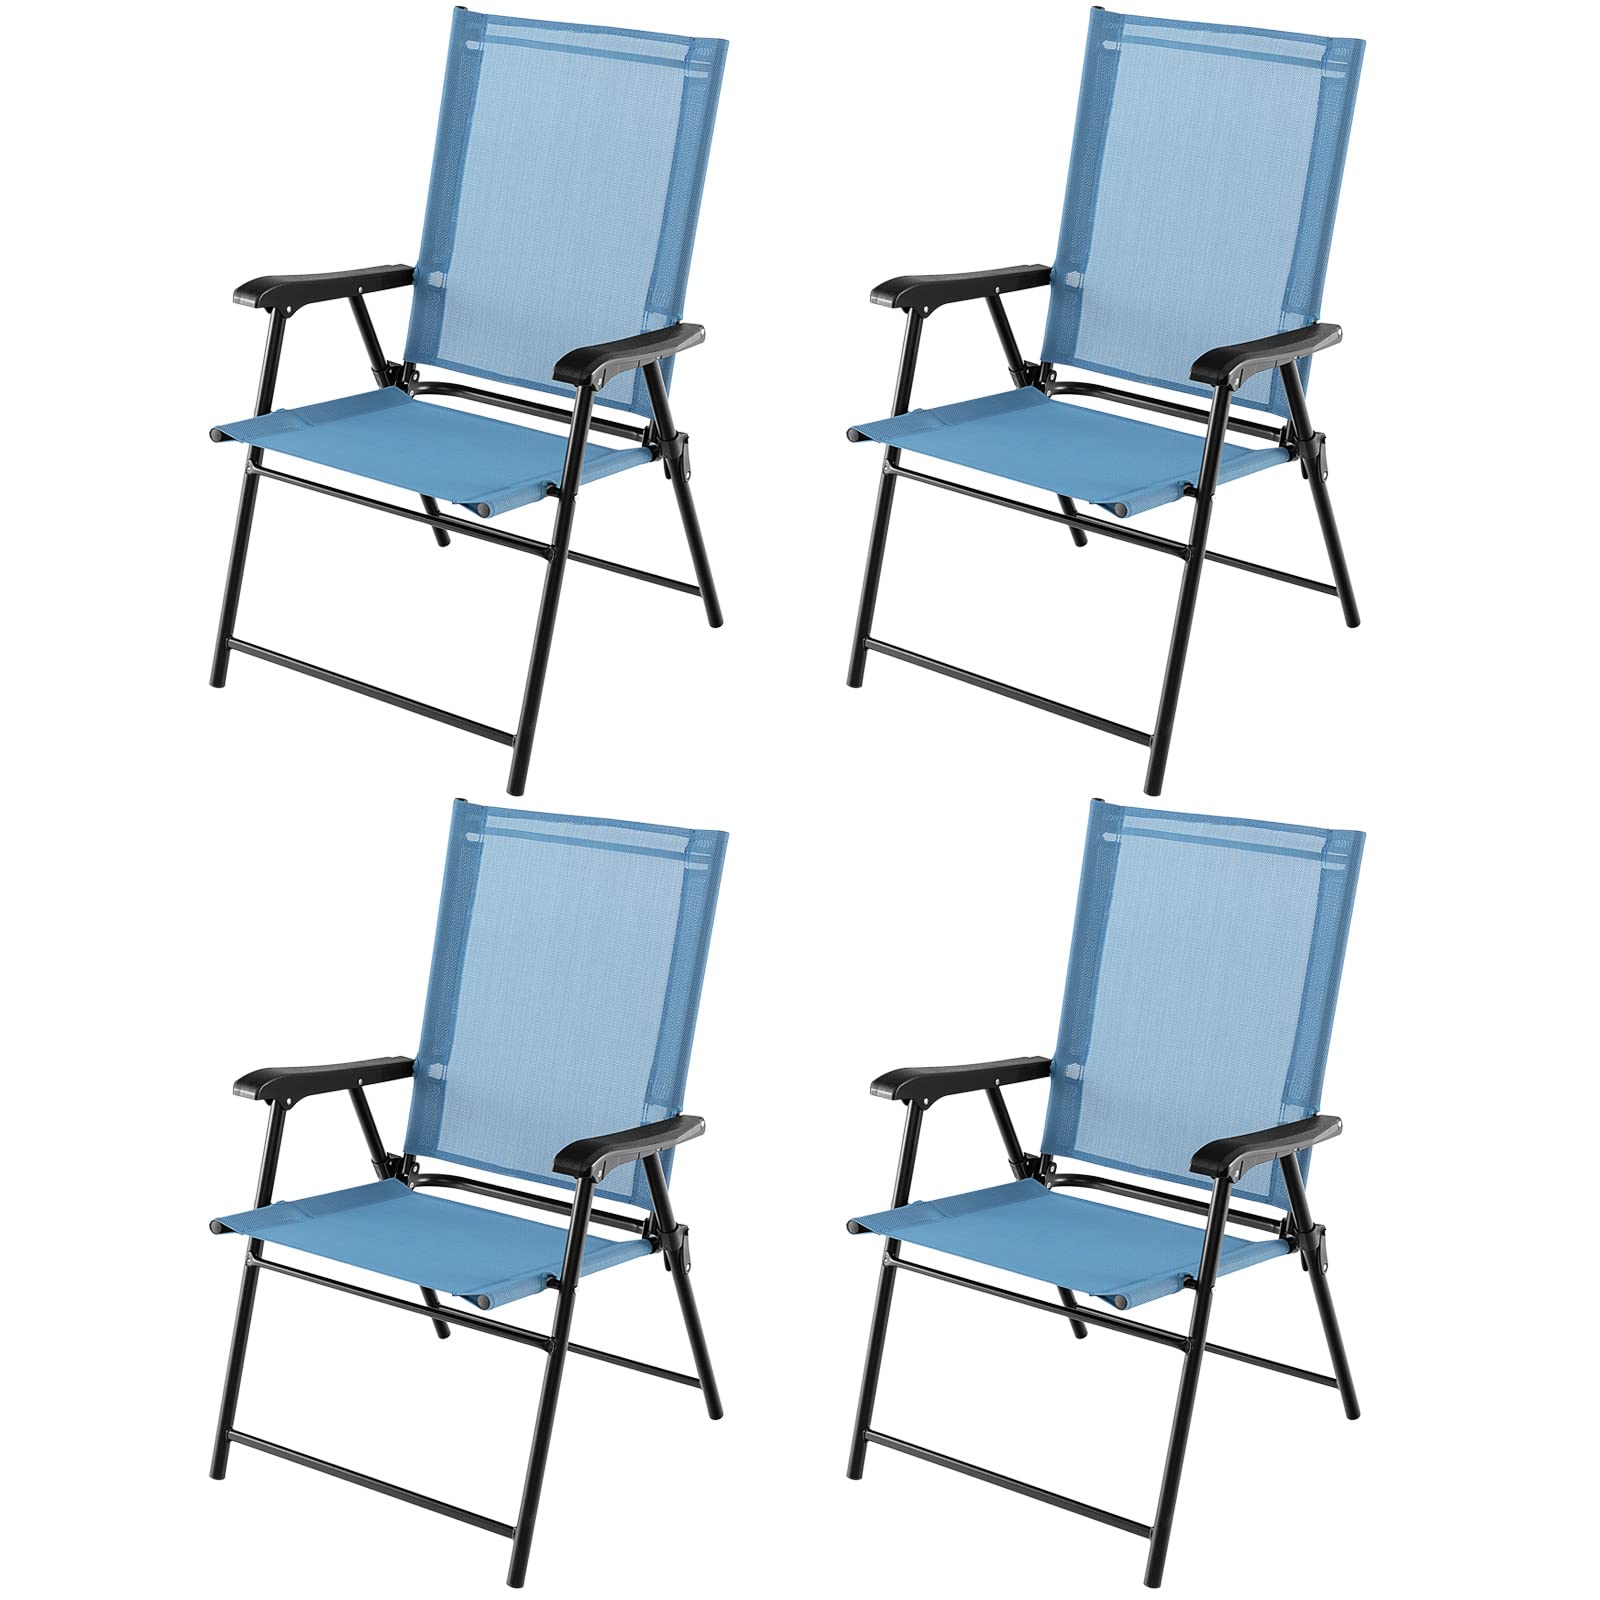 Giantex Patio Chairs Set of 2/4, Folding Patio Chairs for Deck Beach Camping Dining Picnic